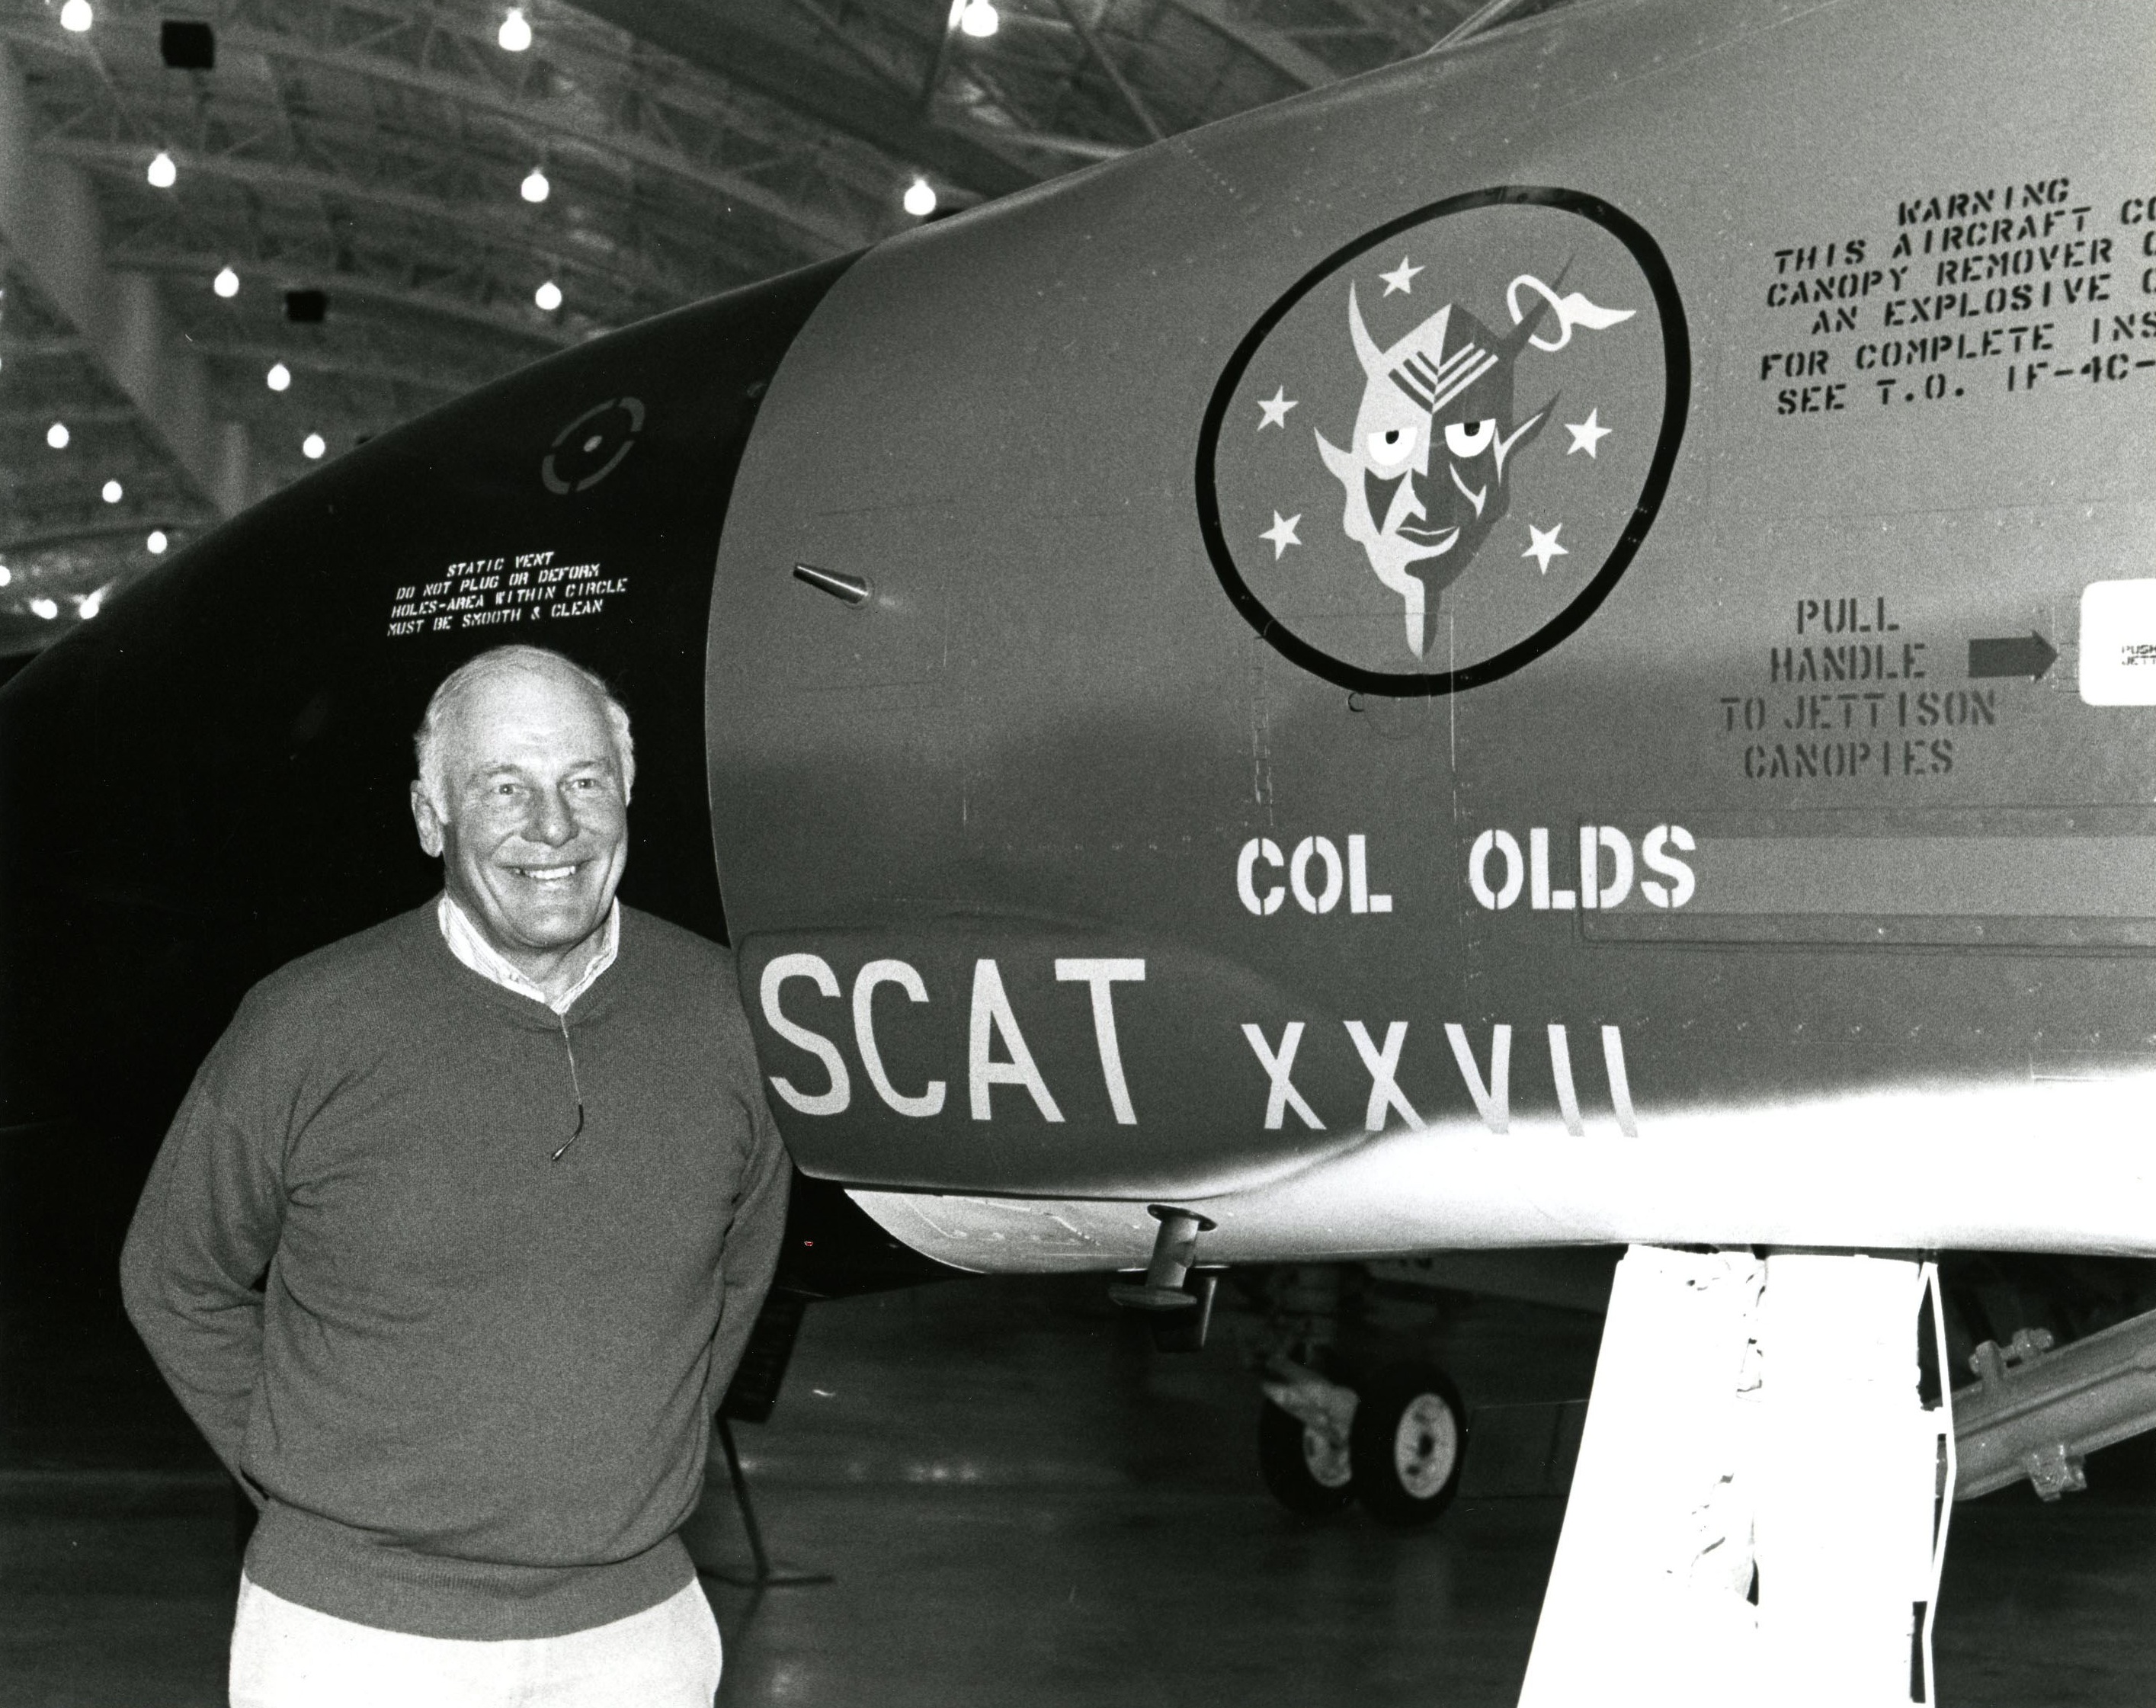 Fighter pilot Brigadier General Robin Olds, U.S. Air Force (Retired) with SCAT XXVII at the National Museum of the United States Air Force. General Olds died 14 June 2007. (U.S. Air Force)